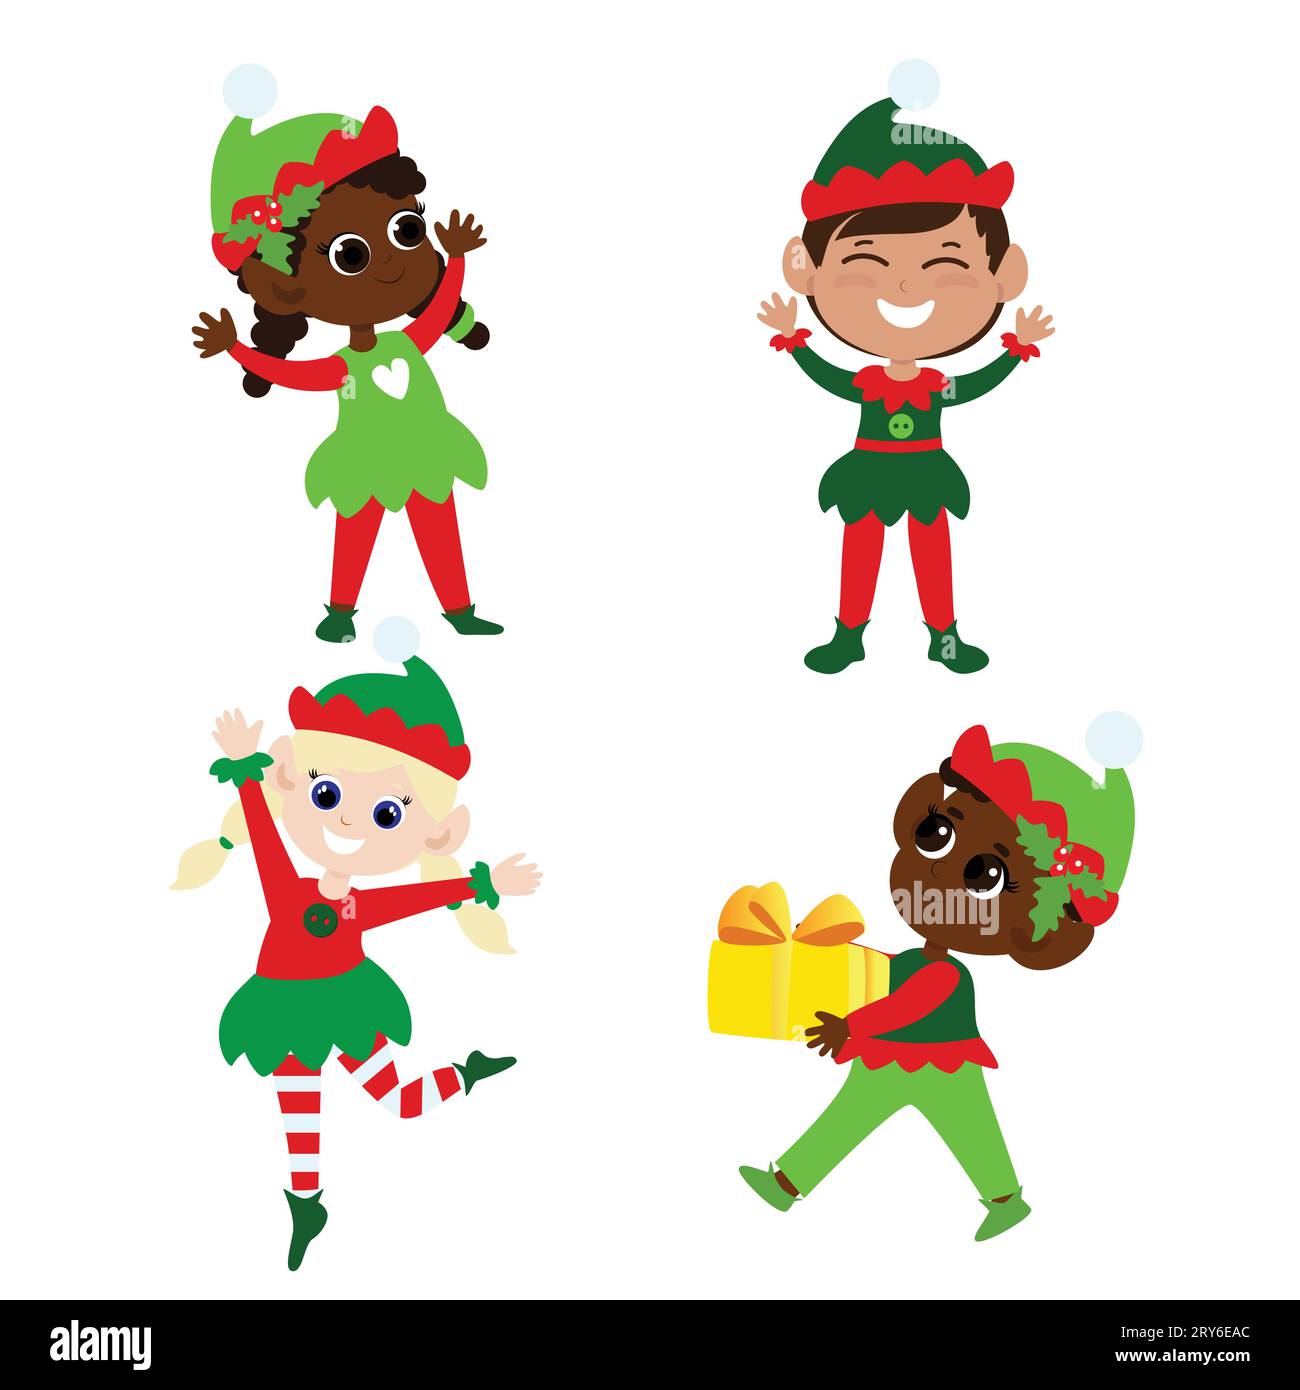 Set Christmas elves. Christmas collection multicultural boys and girls in traditional elf costumes. They dance, smile, bring gifts. Stock Vector